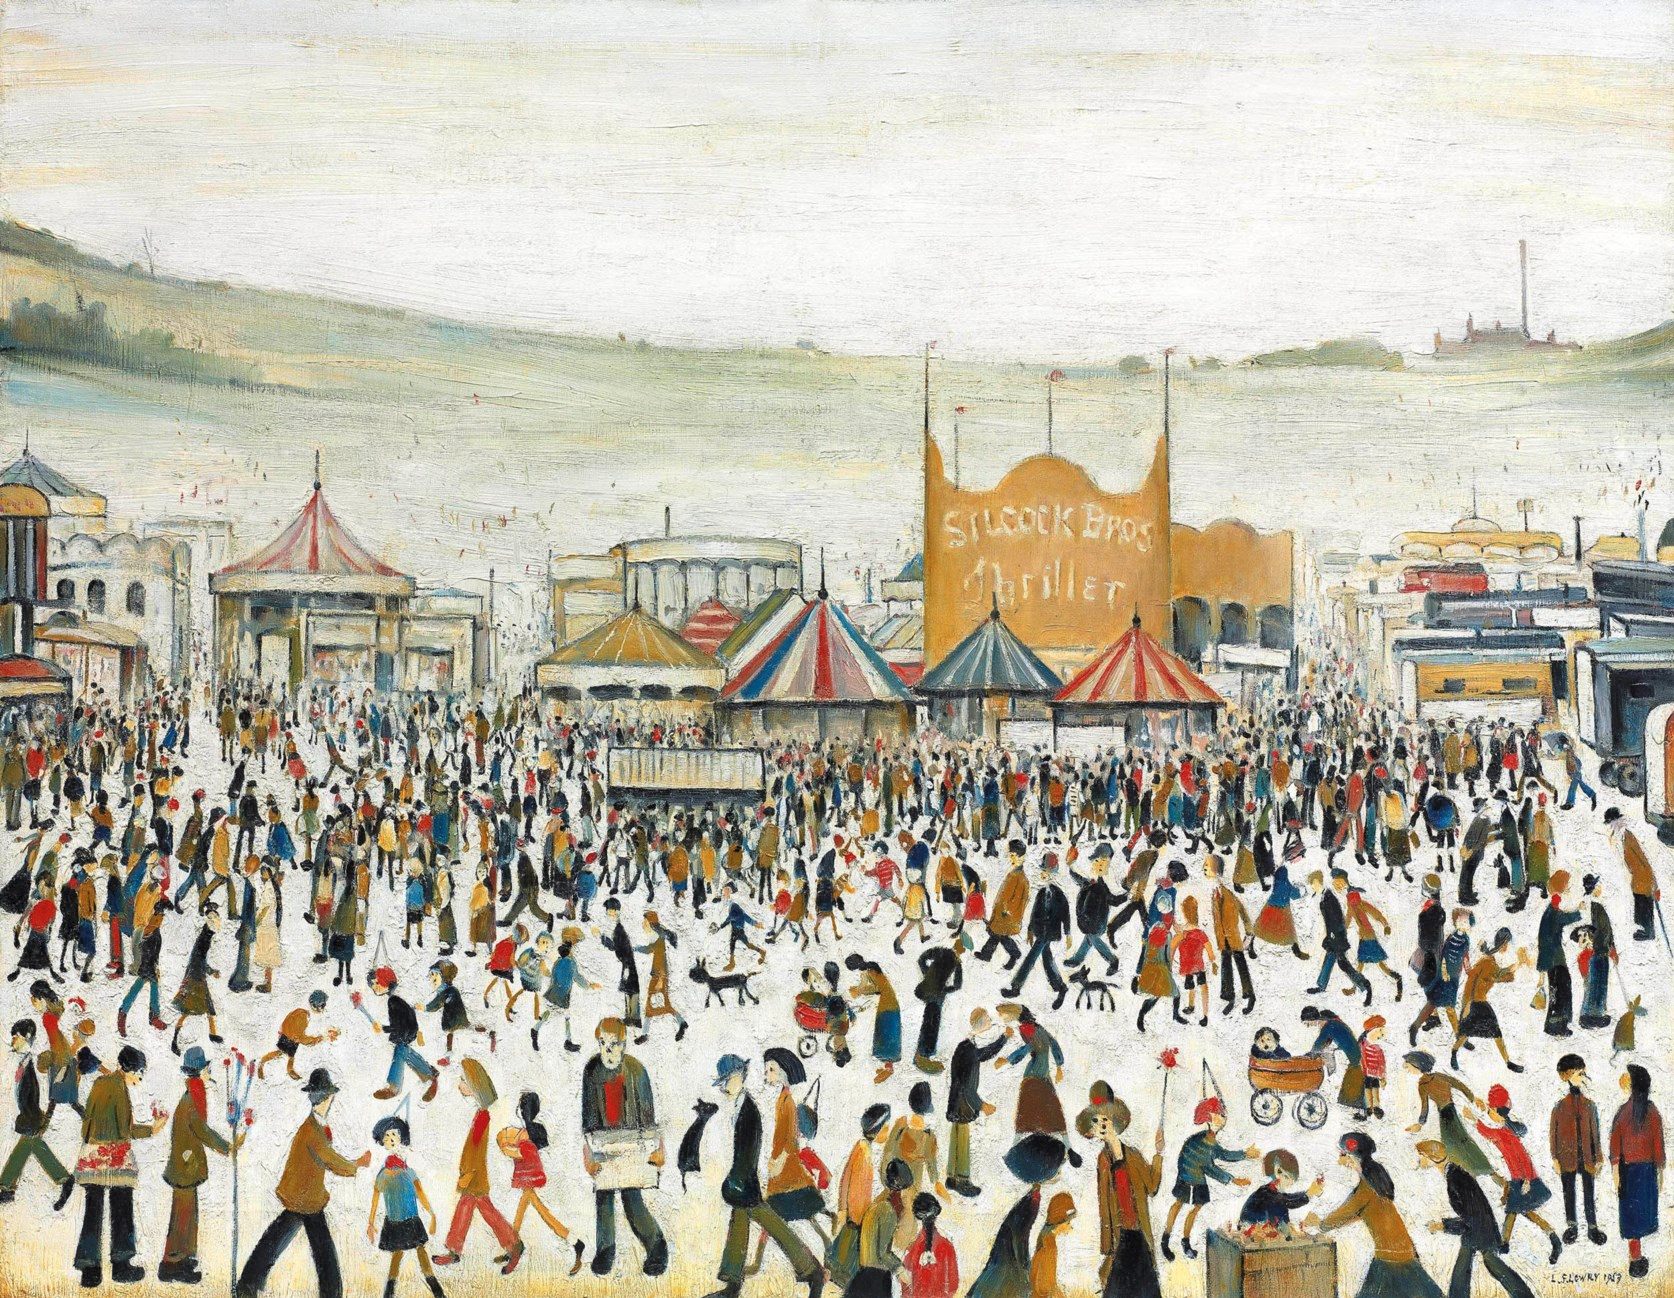 'Fun Fairy at Daisy Nook' (1953) by [L.S. Lowry]